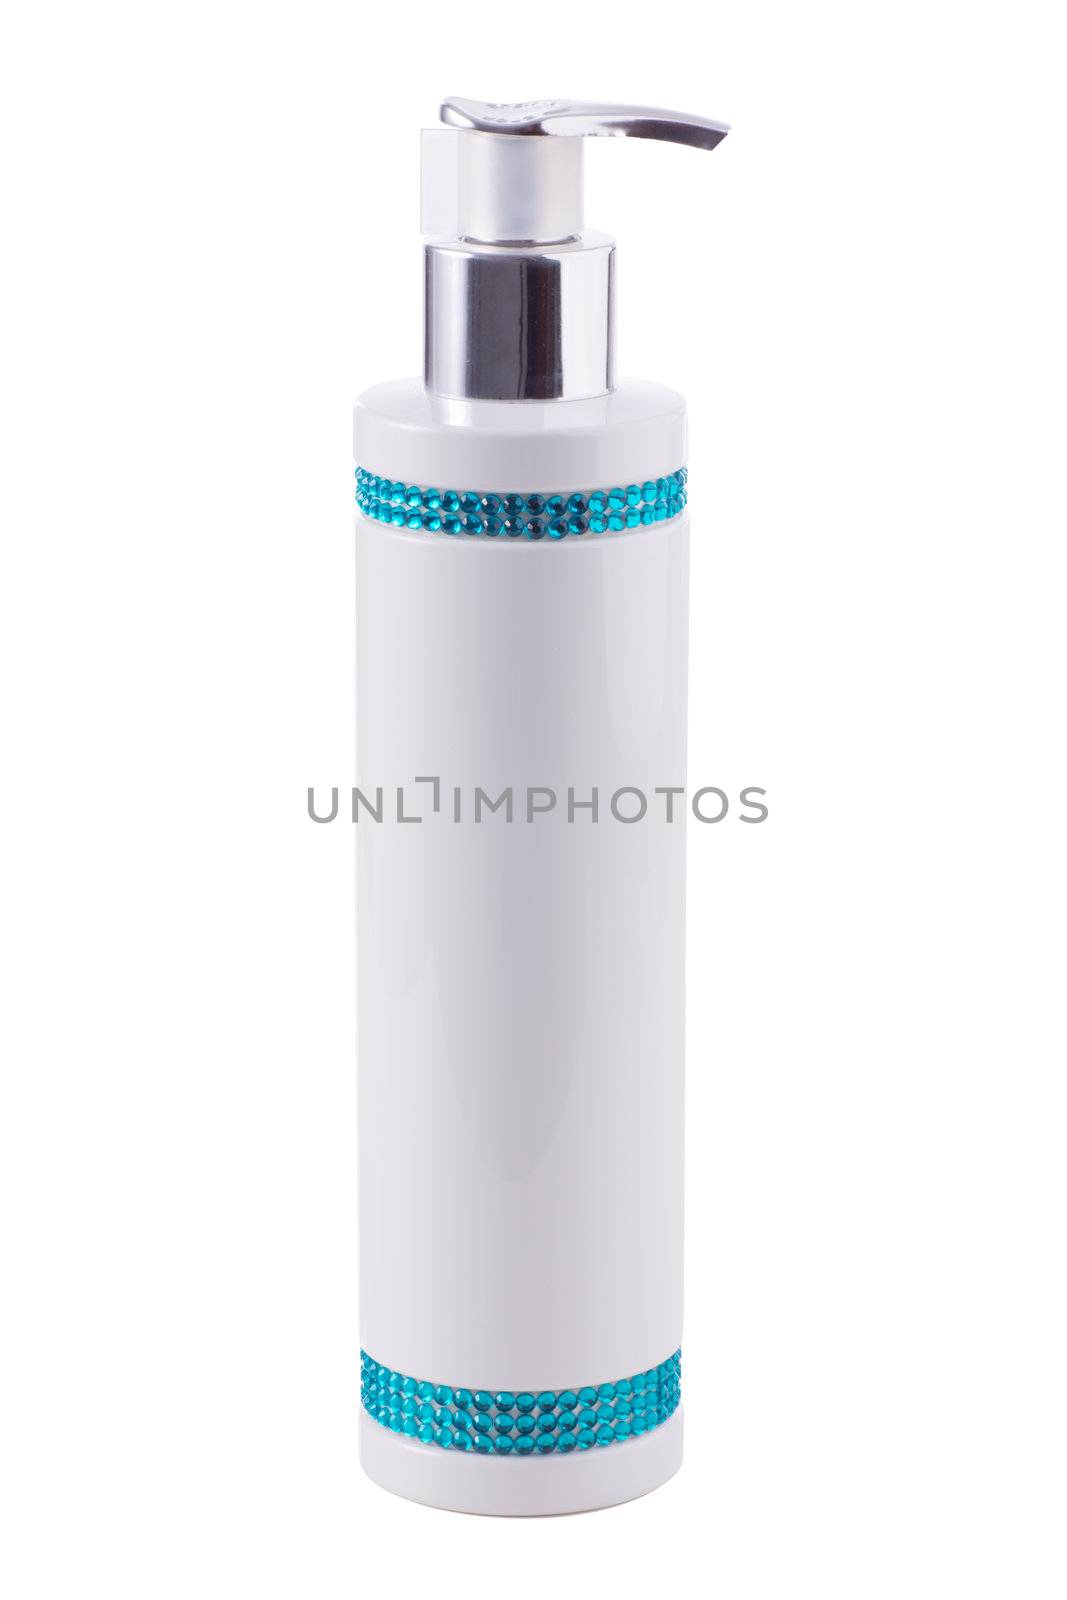 Lotion bottle on white background by JustineOctop